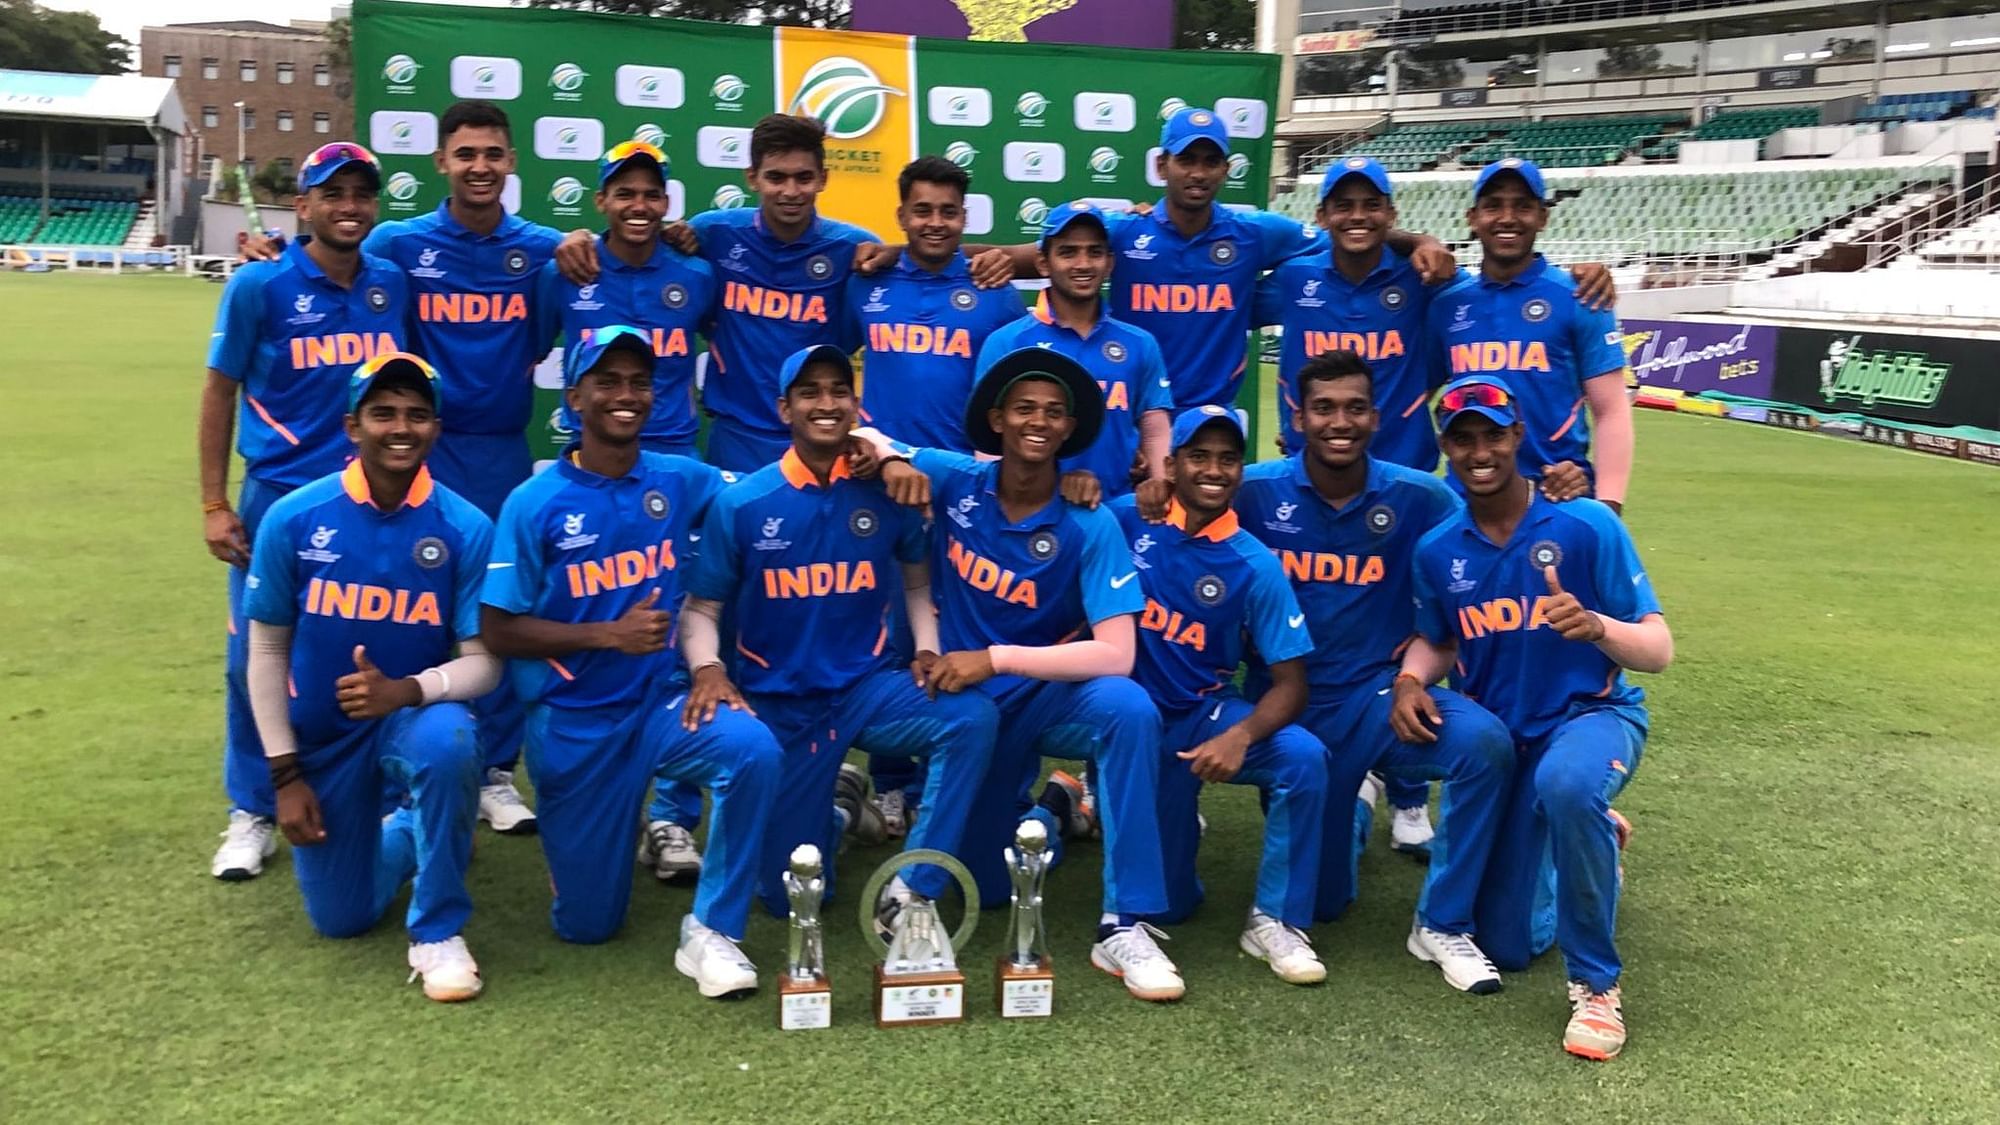 The India U-19 side beat South Africa in the final by 69 runs.